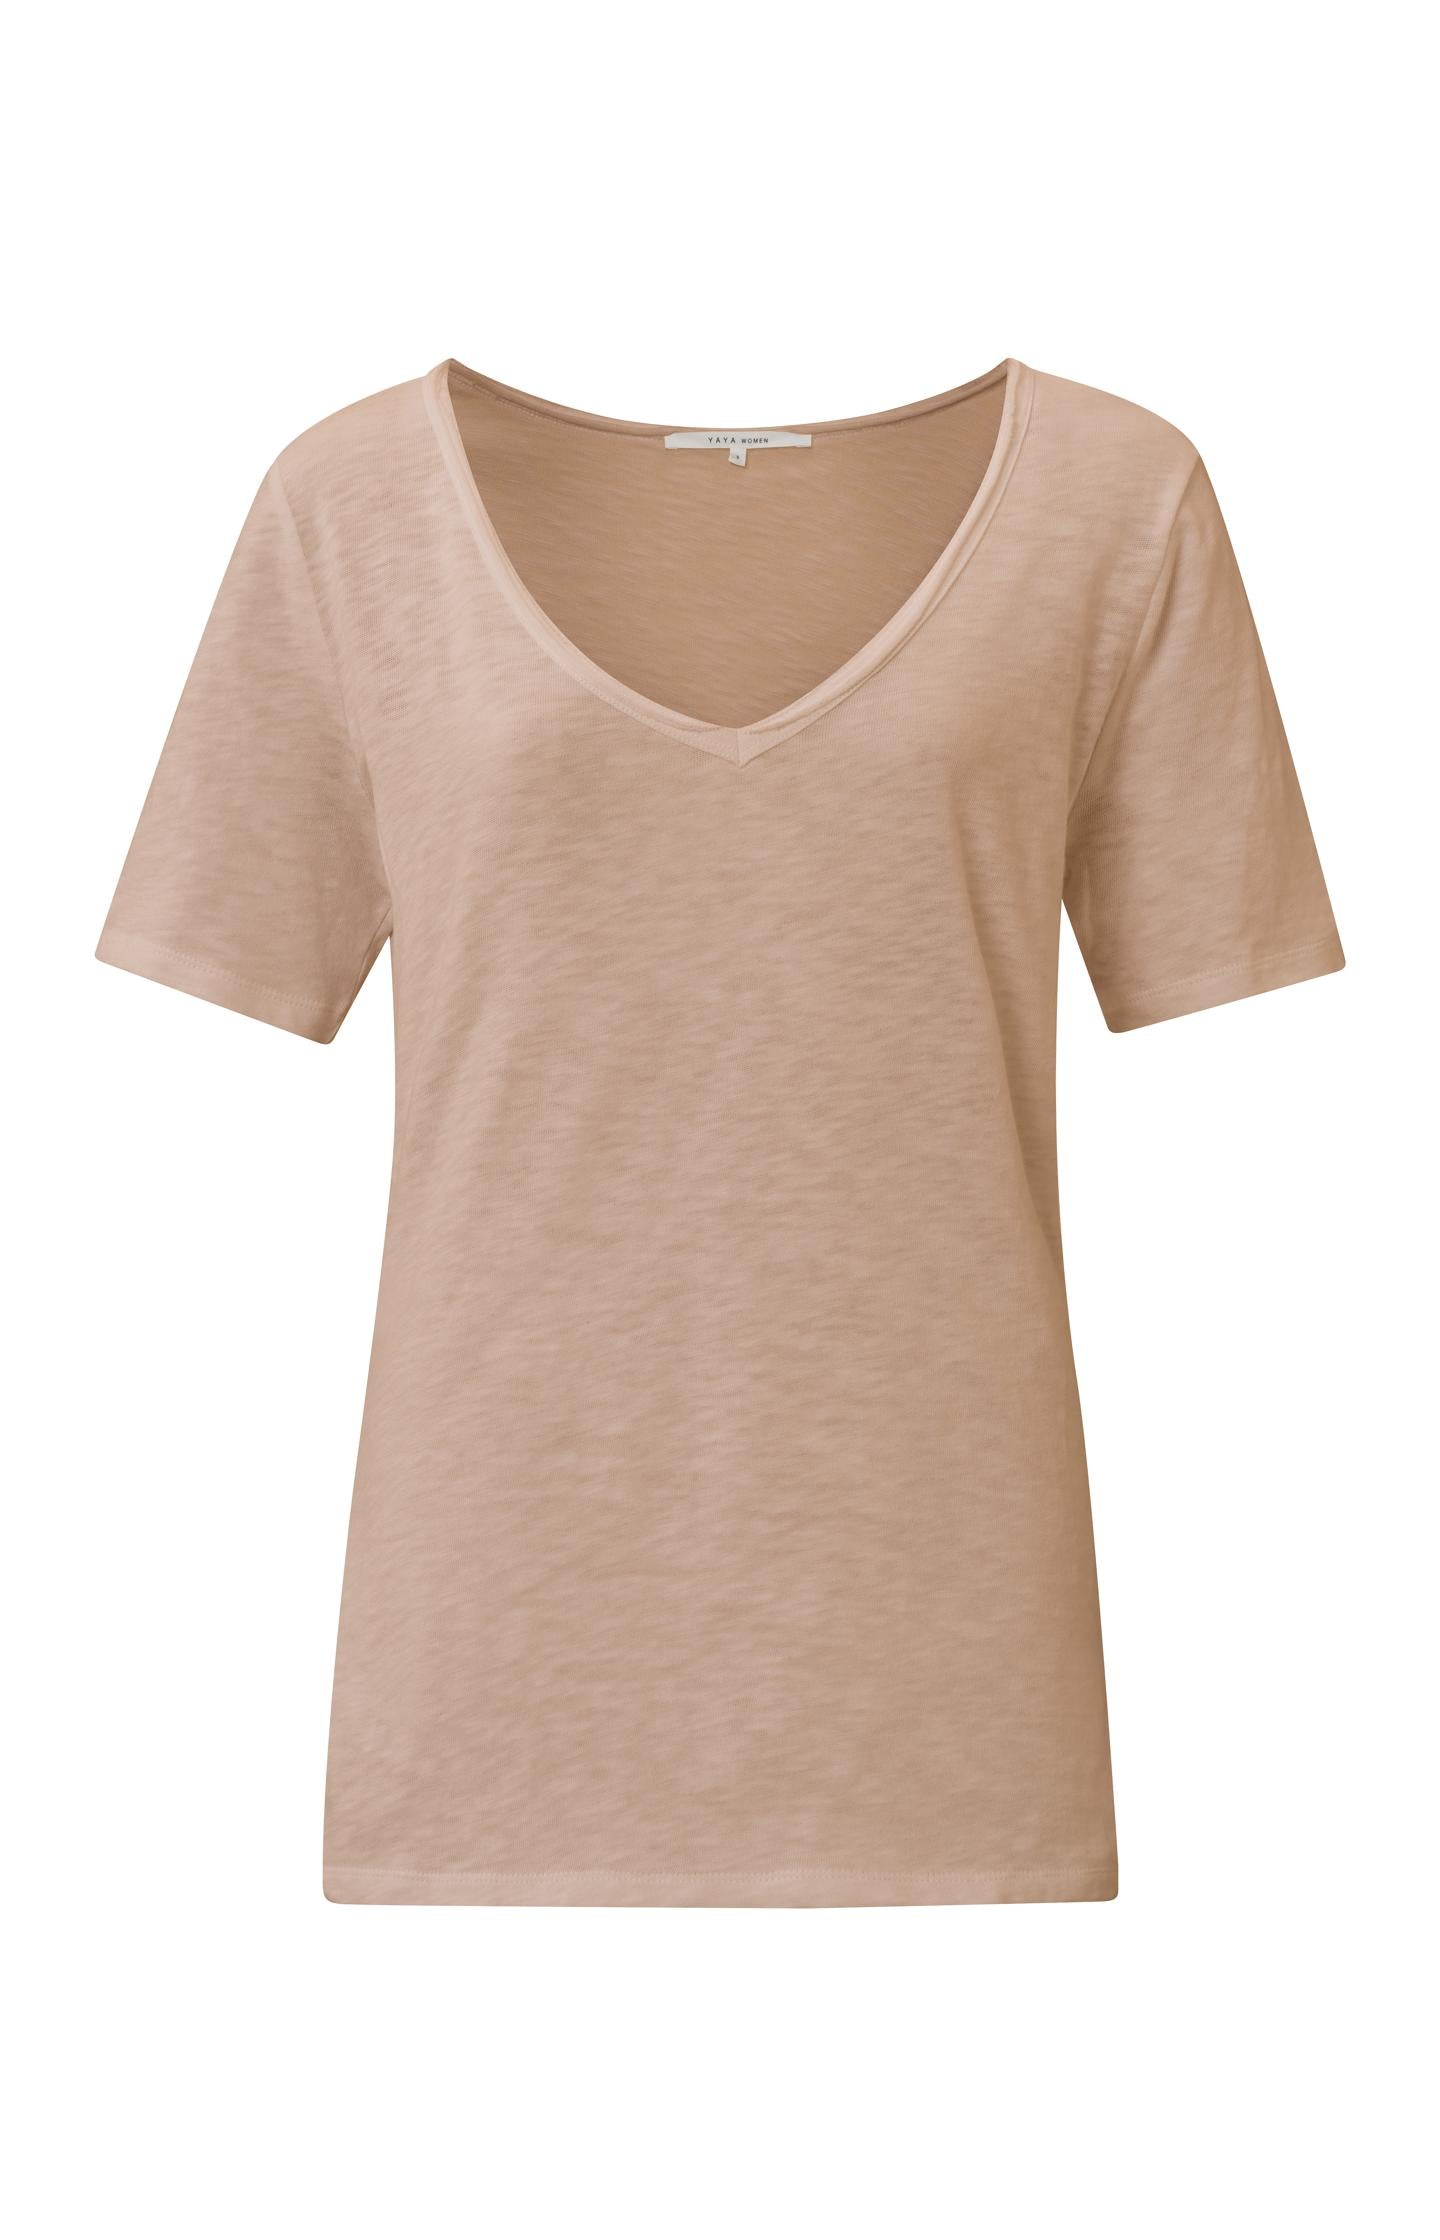 T-shirt with deep V-neck, short sleeves and frayed details - Type: product